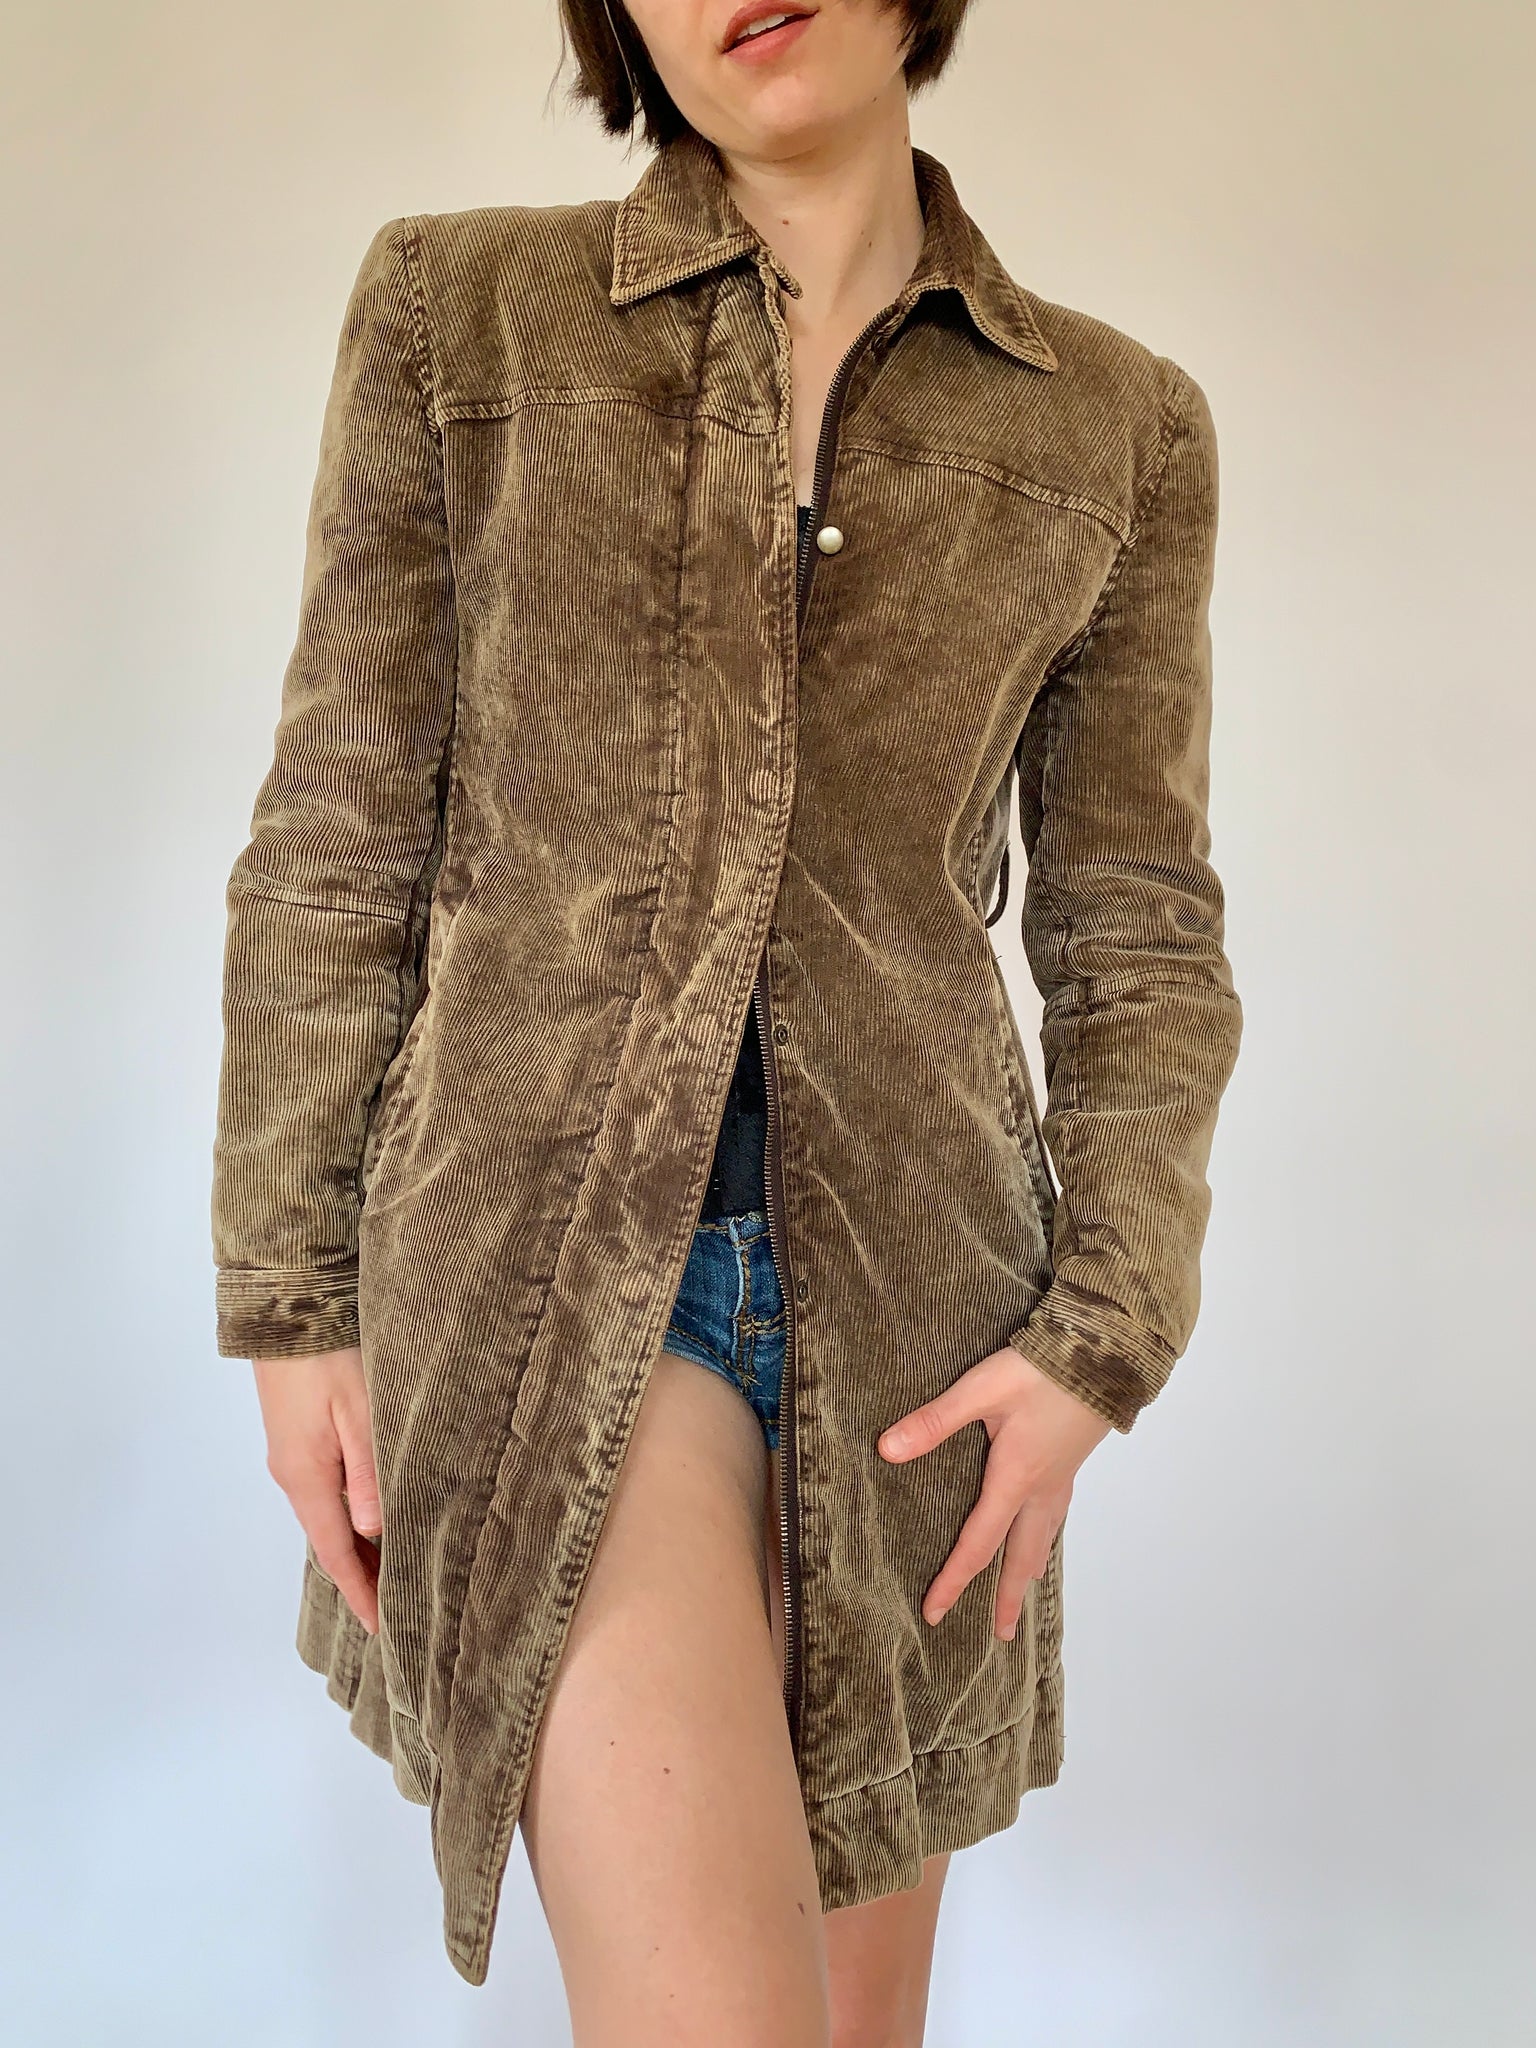 Vintage Corduroy Trench - Small